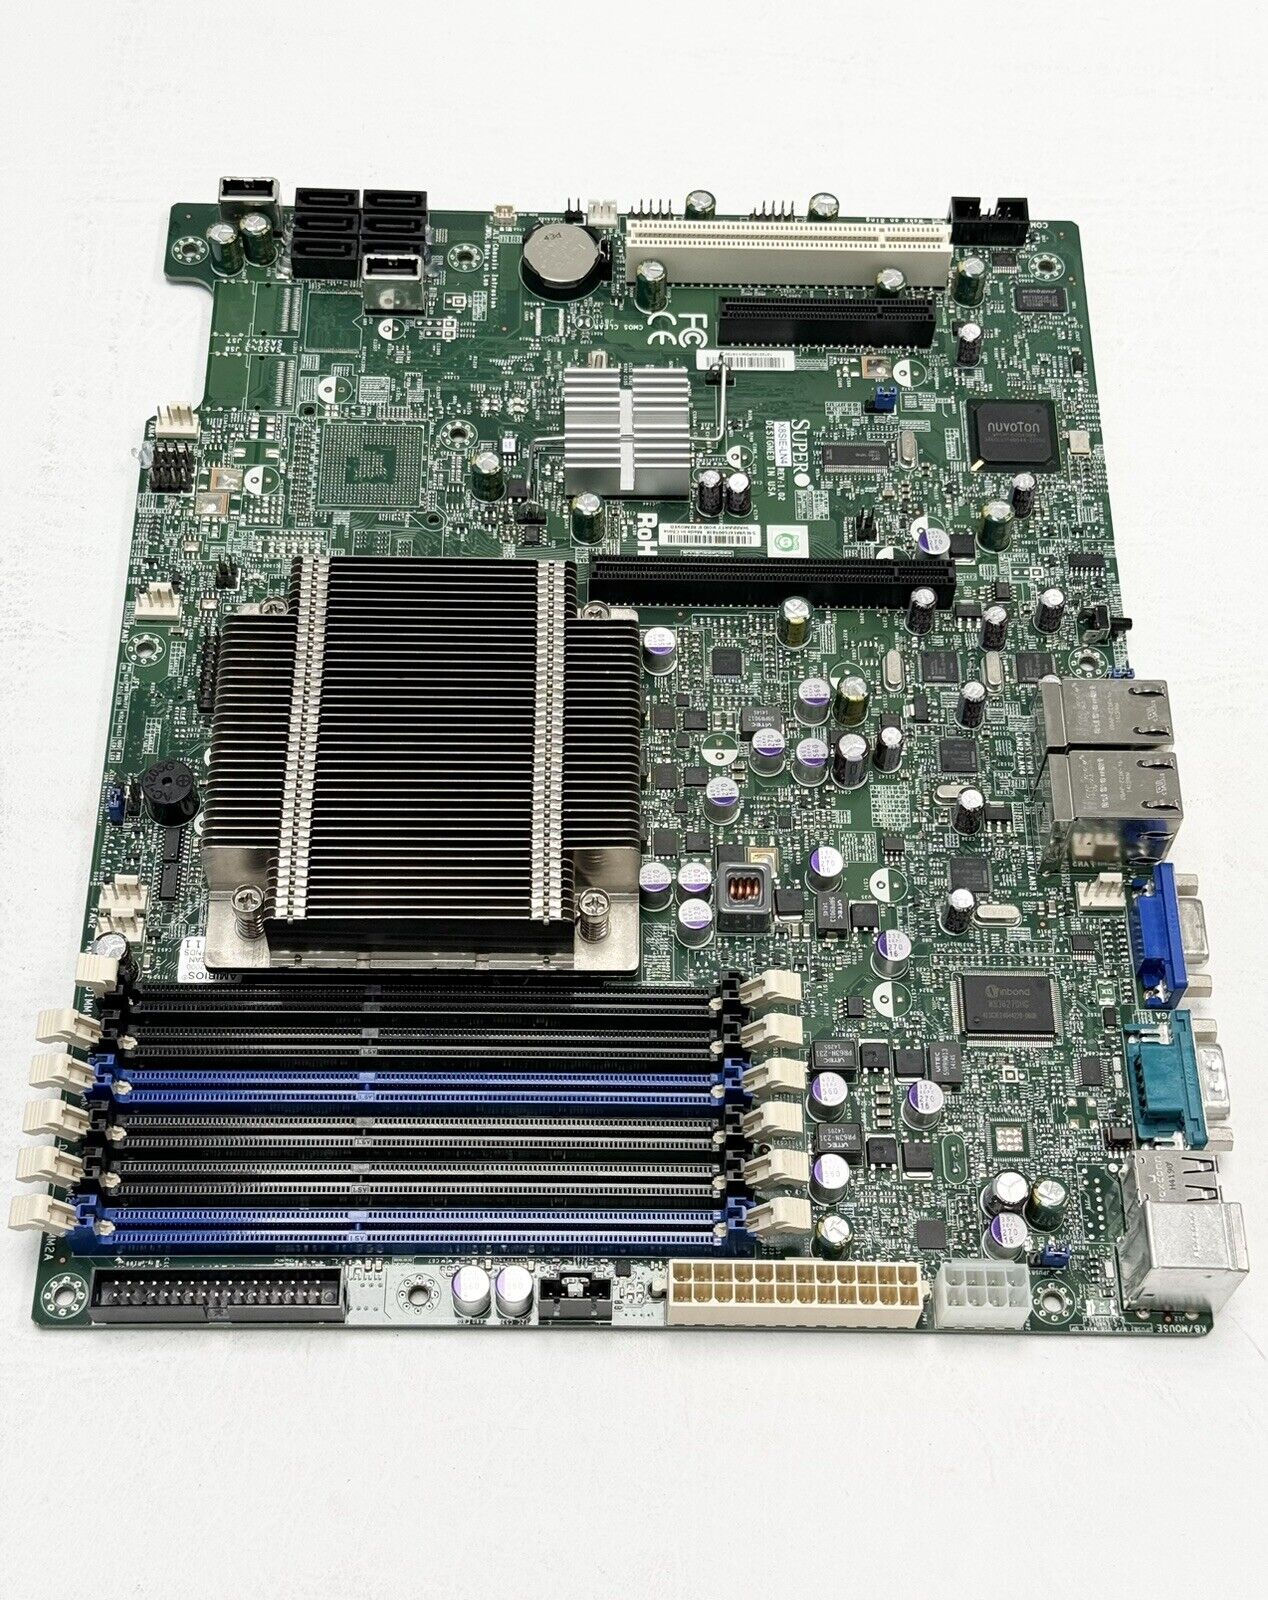 TESTED Supermicro X8SIE-LN4F  Intel 3420 Chipset ATX Server Motherboard